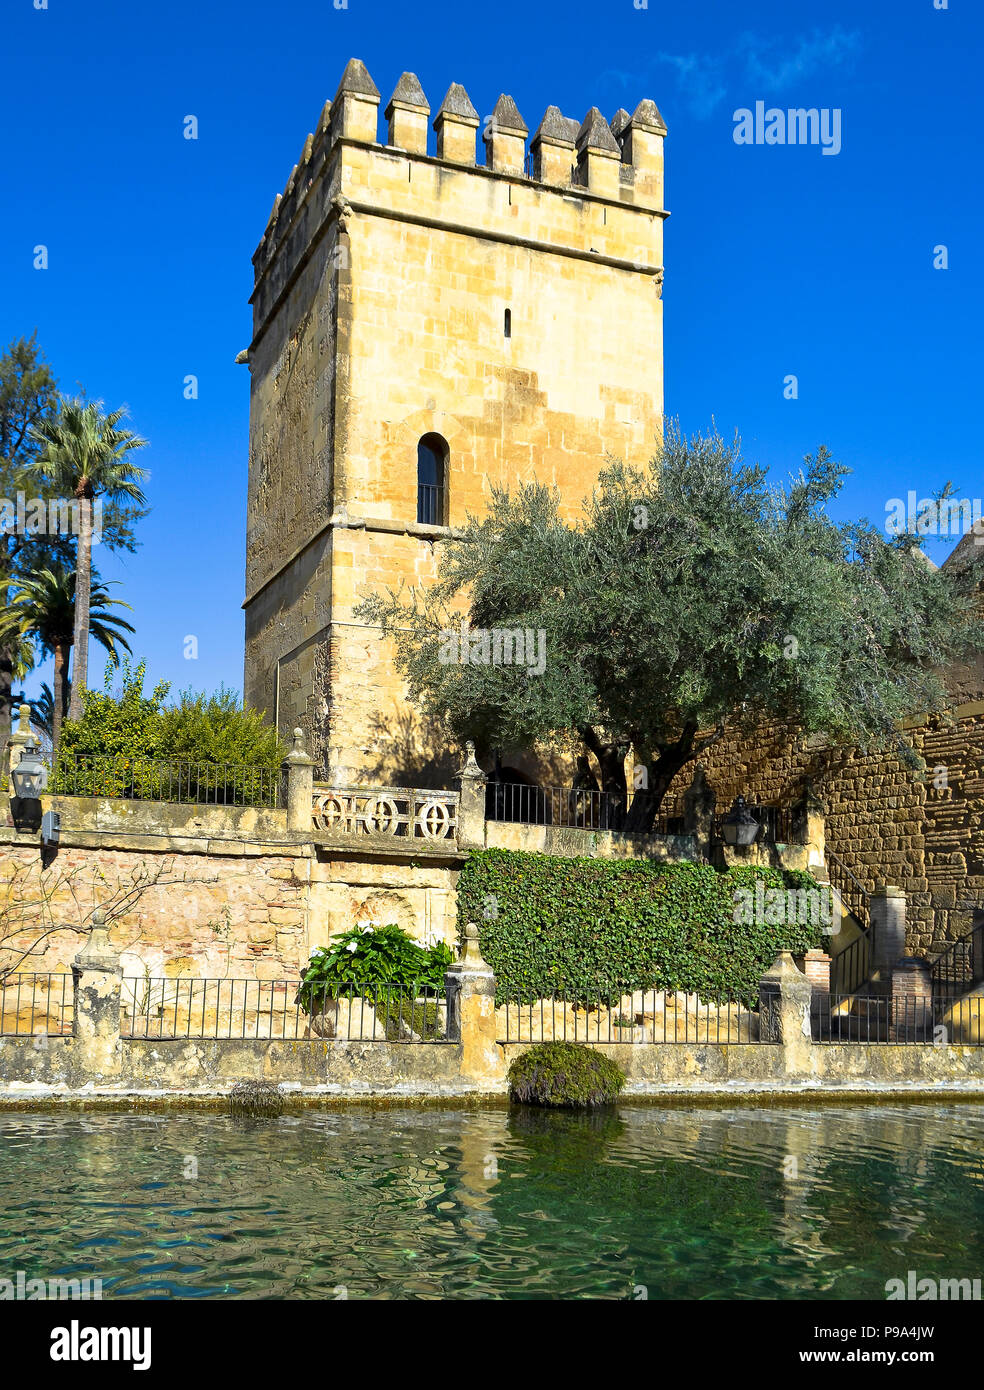 Water and architecture at the Alcázar de los Reyes Cristianos in Cordoba, Spain Stock Photo